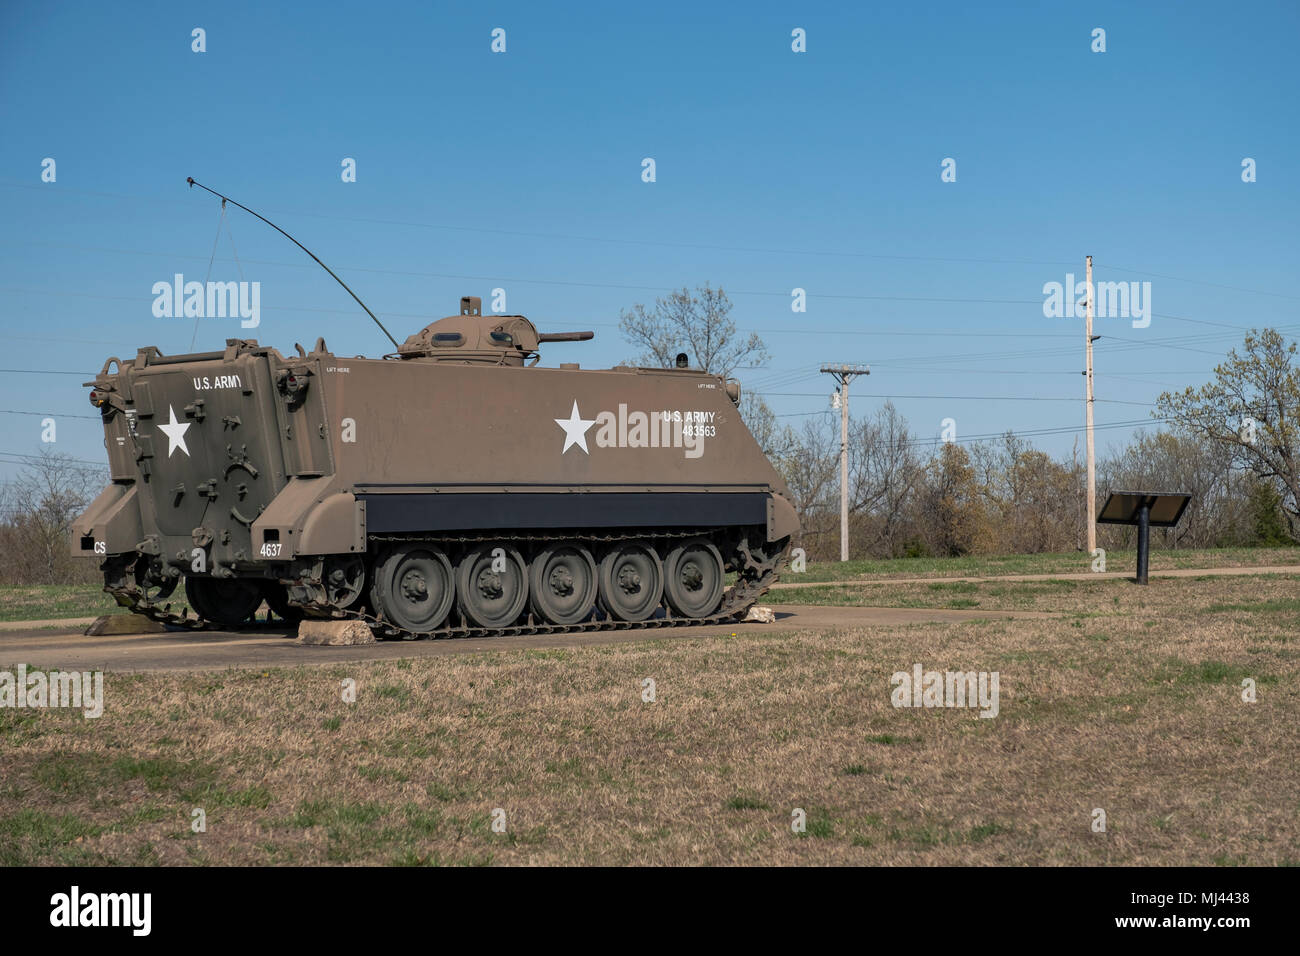 FORT LEONARD WOOD, MO-APRIL 29, 2018: Military Vehicle Armored Personnel Carrier Stock Photo